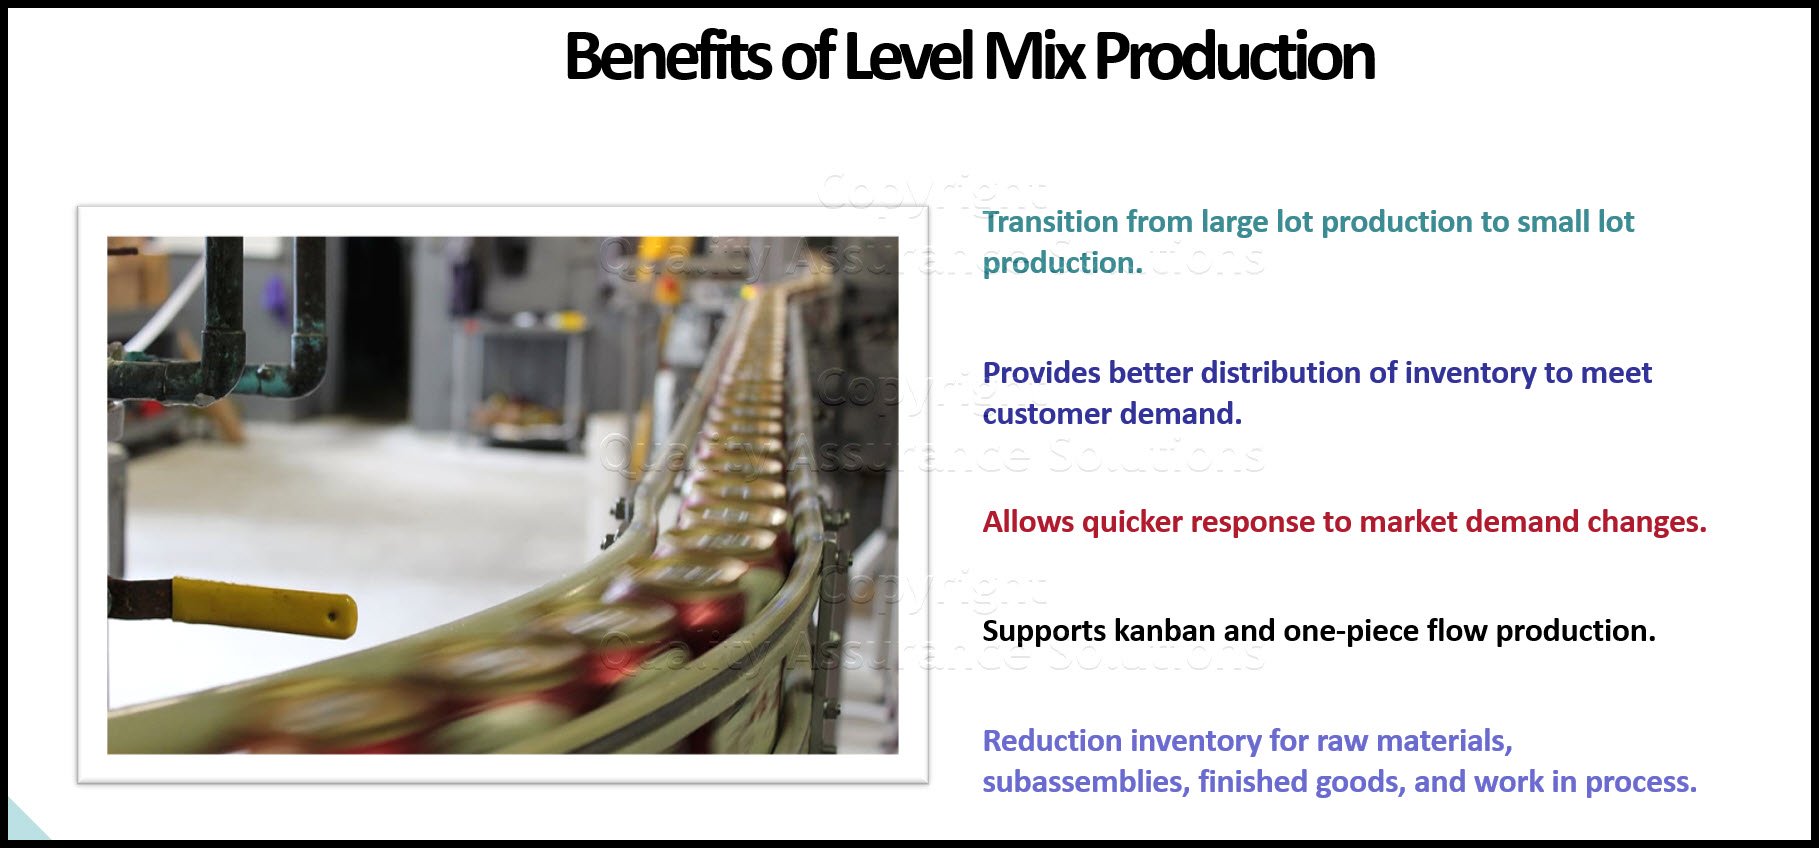 Level Mix Model Production means scheduling daily production in a sequence that evens out the peaks and valleys of produced quantities. Learn more!